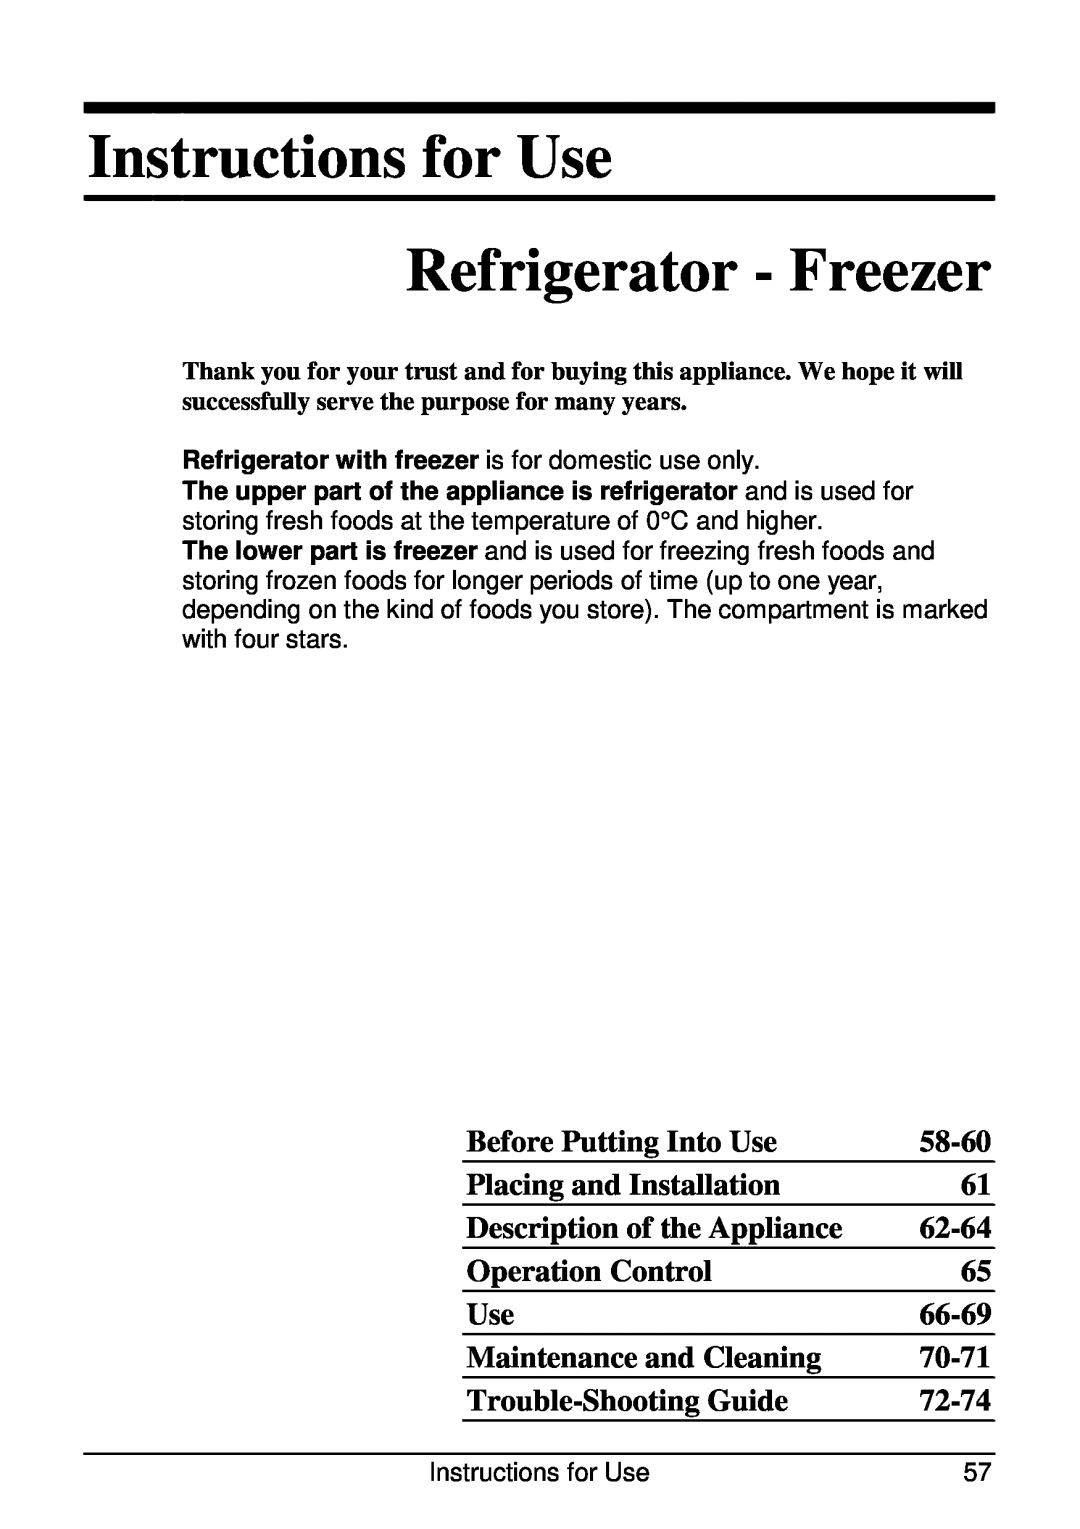 Smeg CR320ASX manual Before Putting Into Use, 58-60, Placing and Installation, Description of the Appliance, 62-64, 66-69 